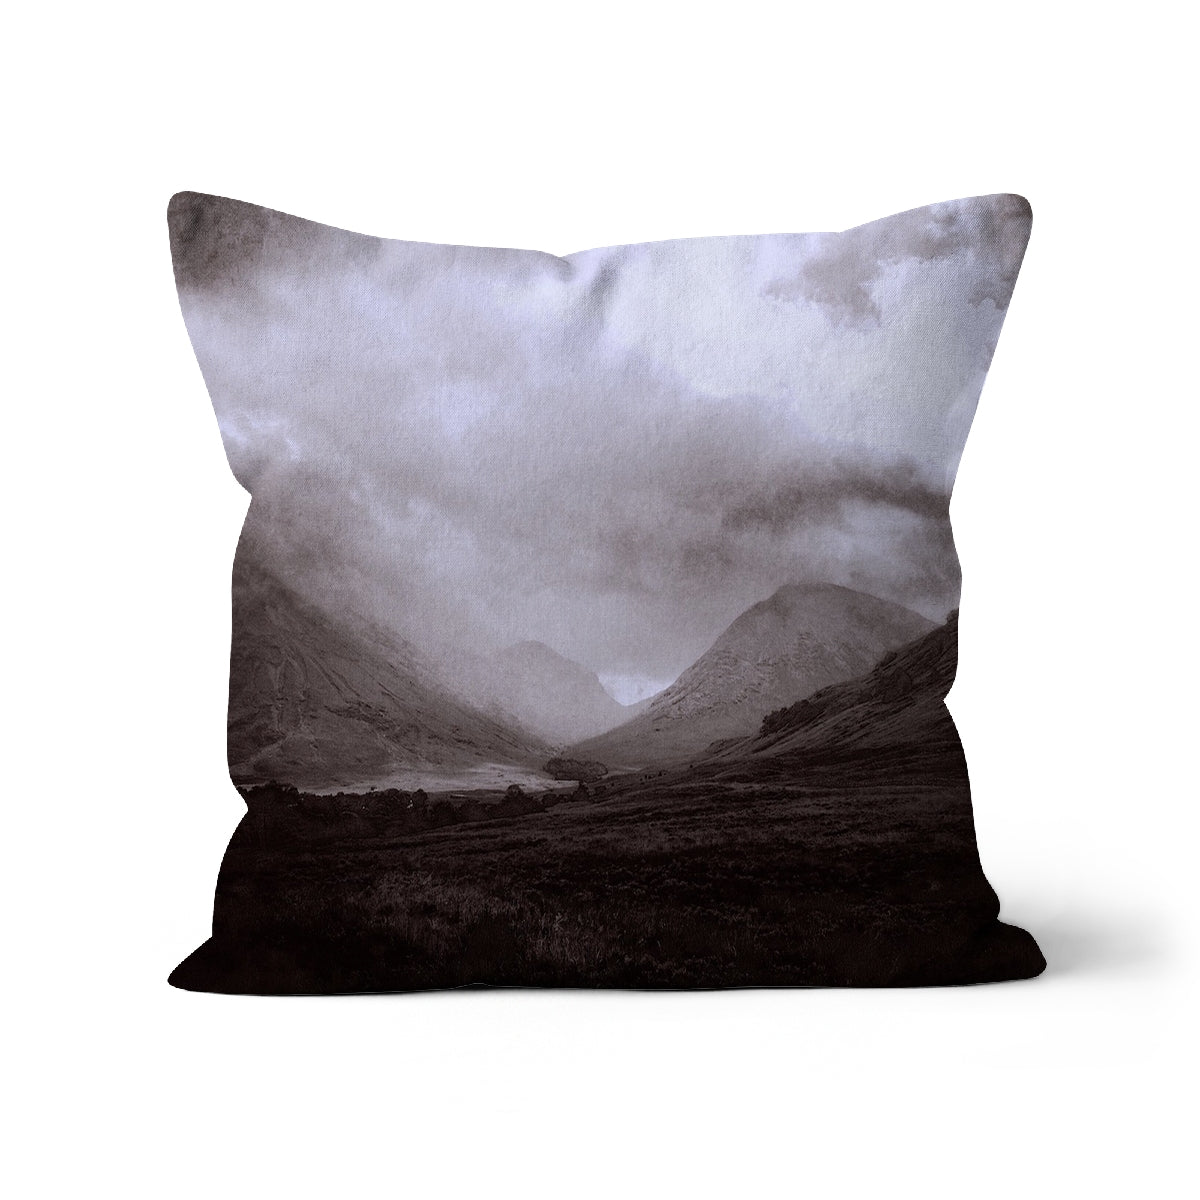 Glencoe Mist Art Gifts Cushion-Cushions-Glencoe Art Gallery-Faux Suede-22"x22"-Paintings, Prints, Homeware, Art Gifts From Scotland By Scottish Artist Kevin Hunter